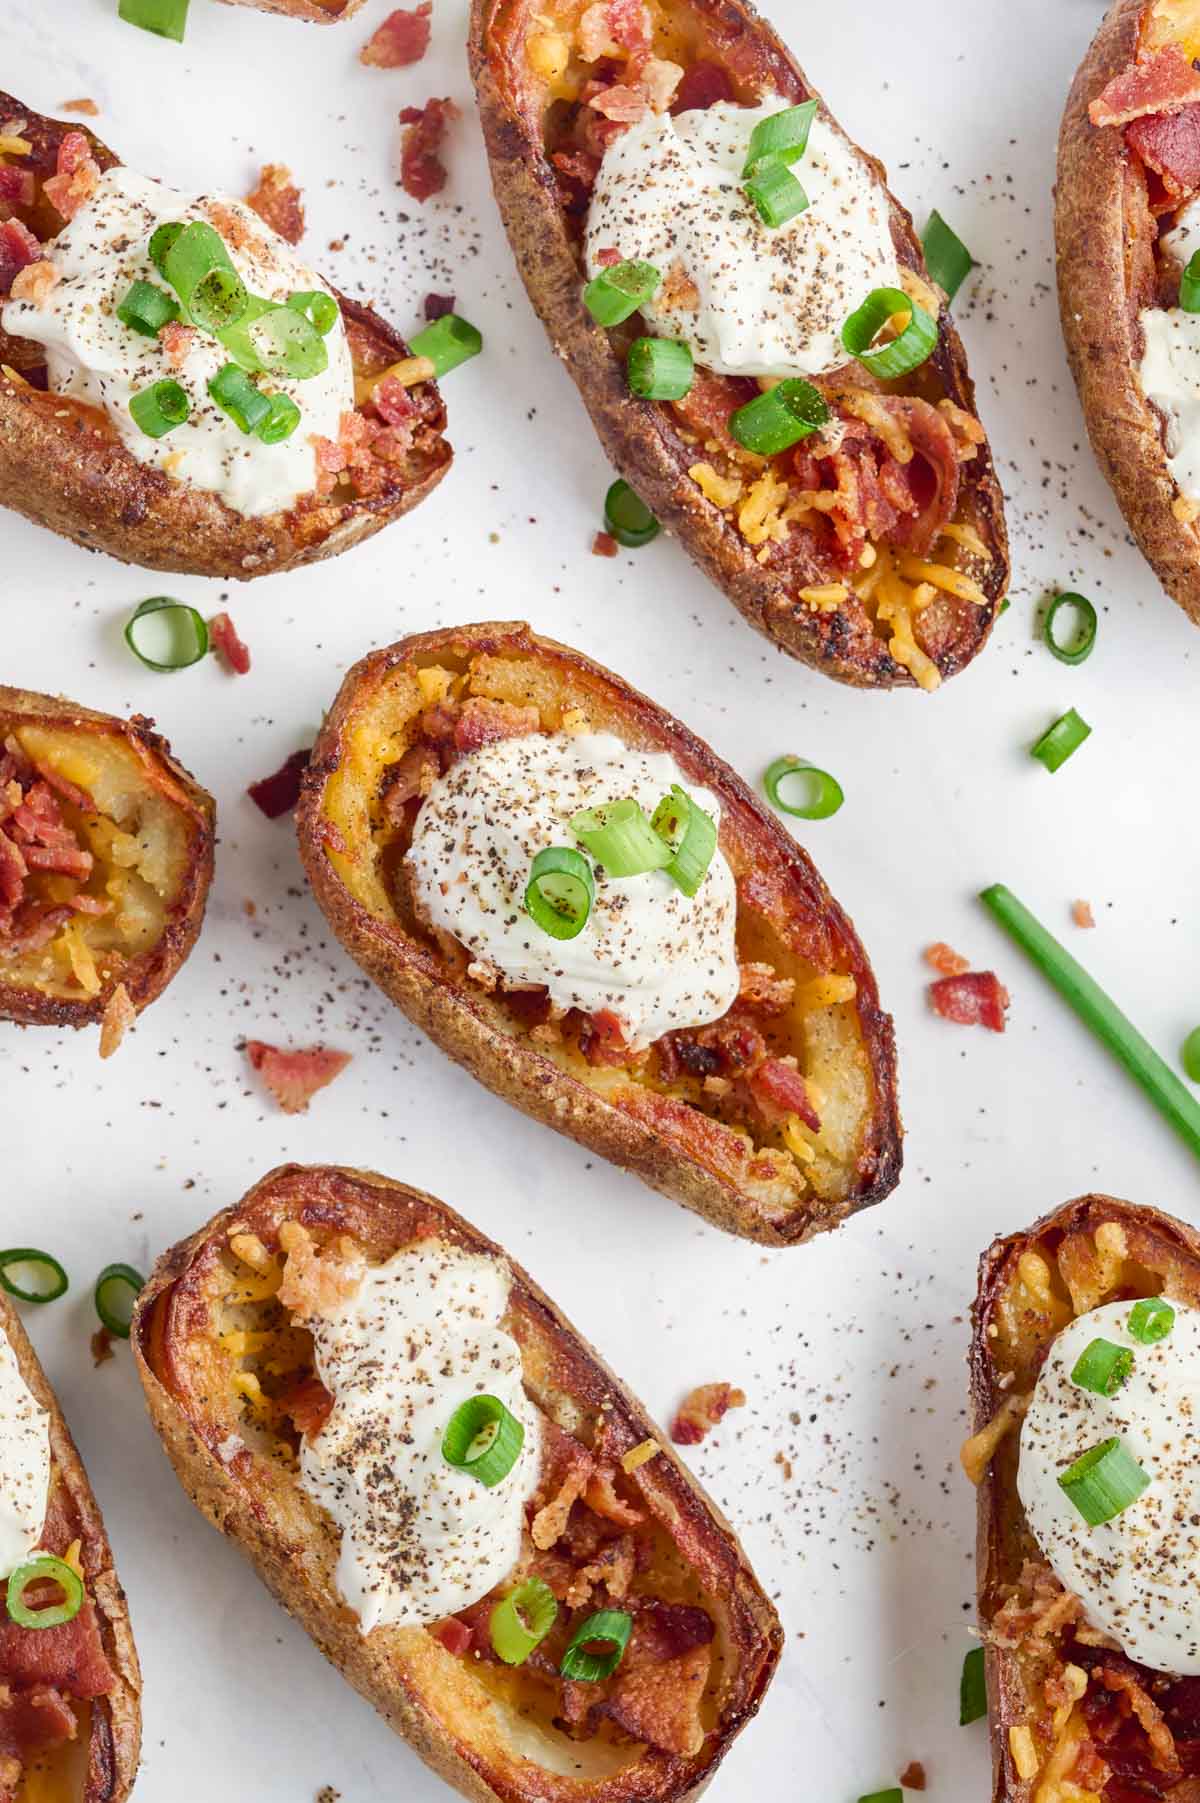 Baked potato skins are crispy and delicious.